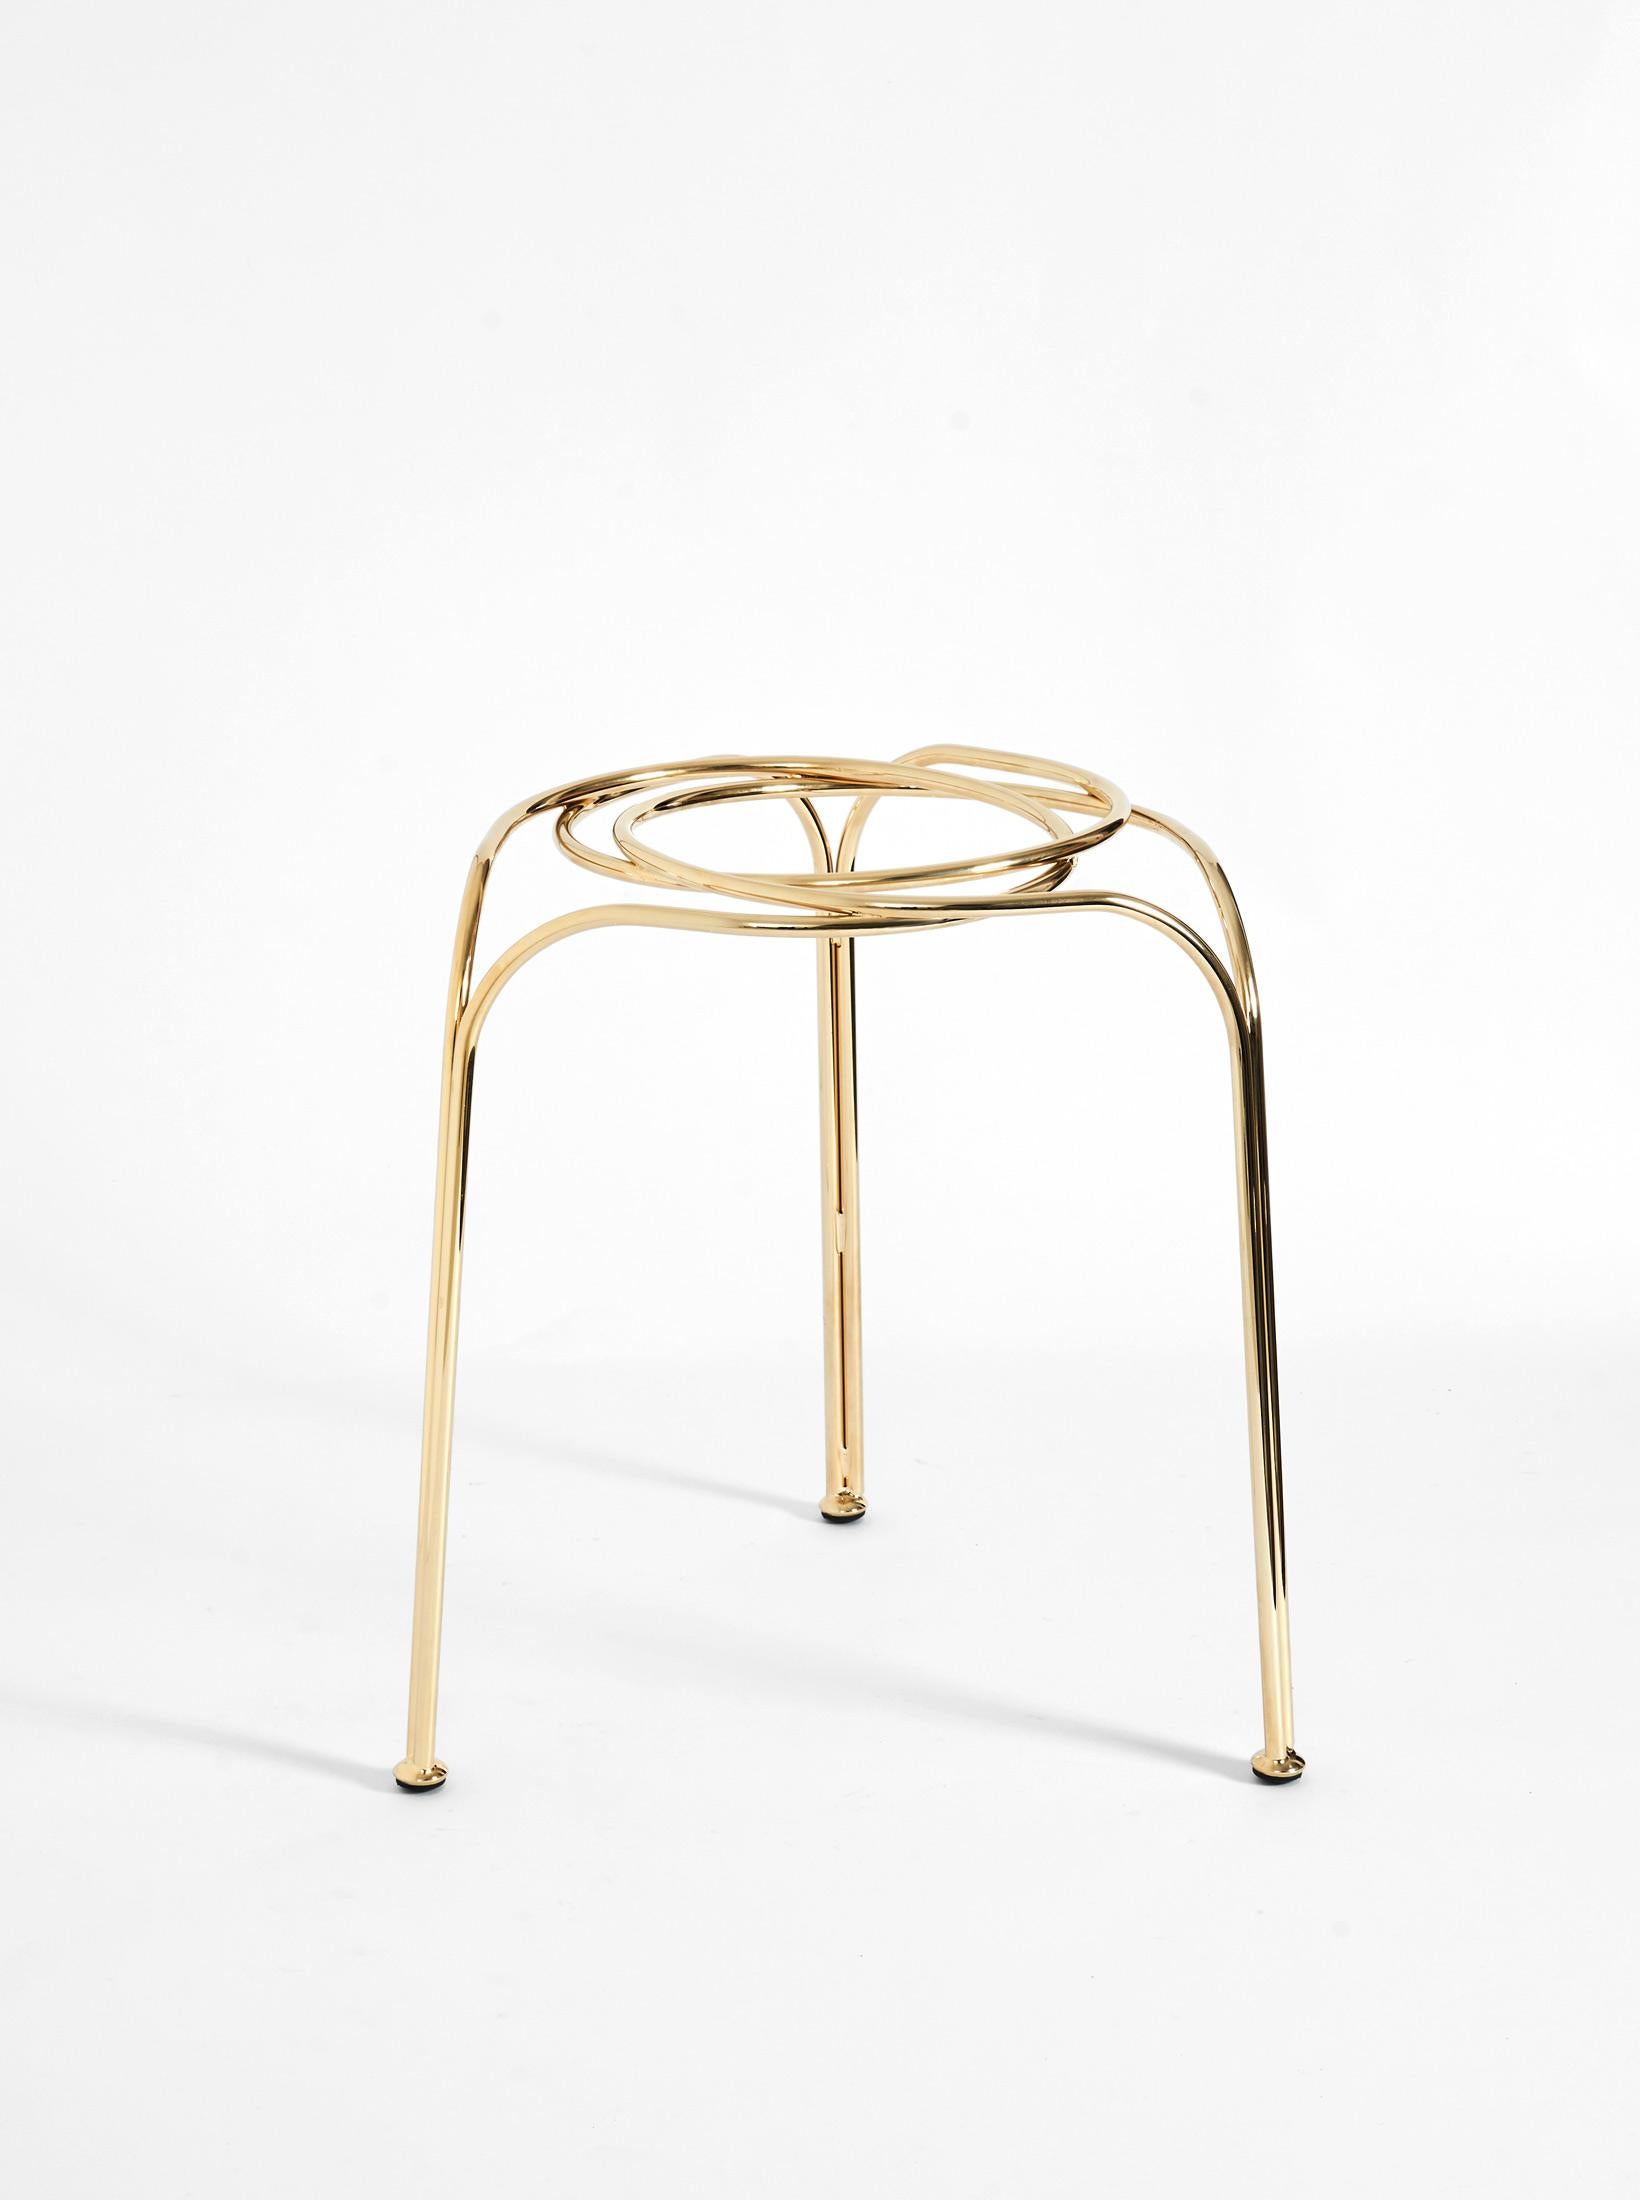 An element, a metal wire that is the stretch that draws a circle in space. Three elements, three circles, integrate and inerpenetrate in a geometric game creating an unexpectedly solid object.
Flow stool or sculpture, design by Enrico Girotti, is